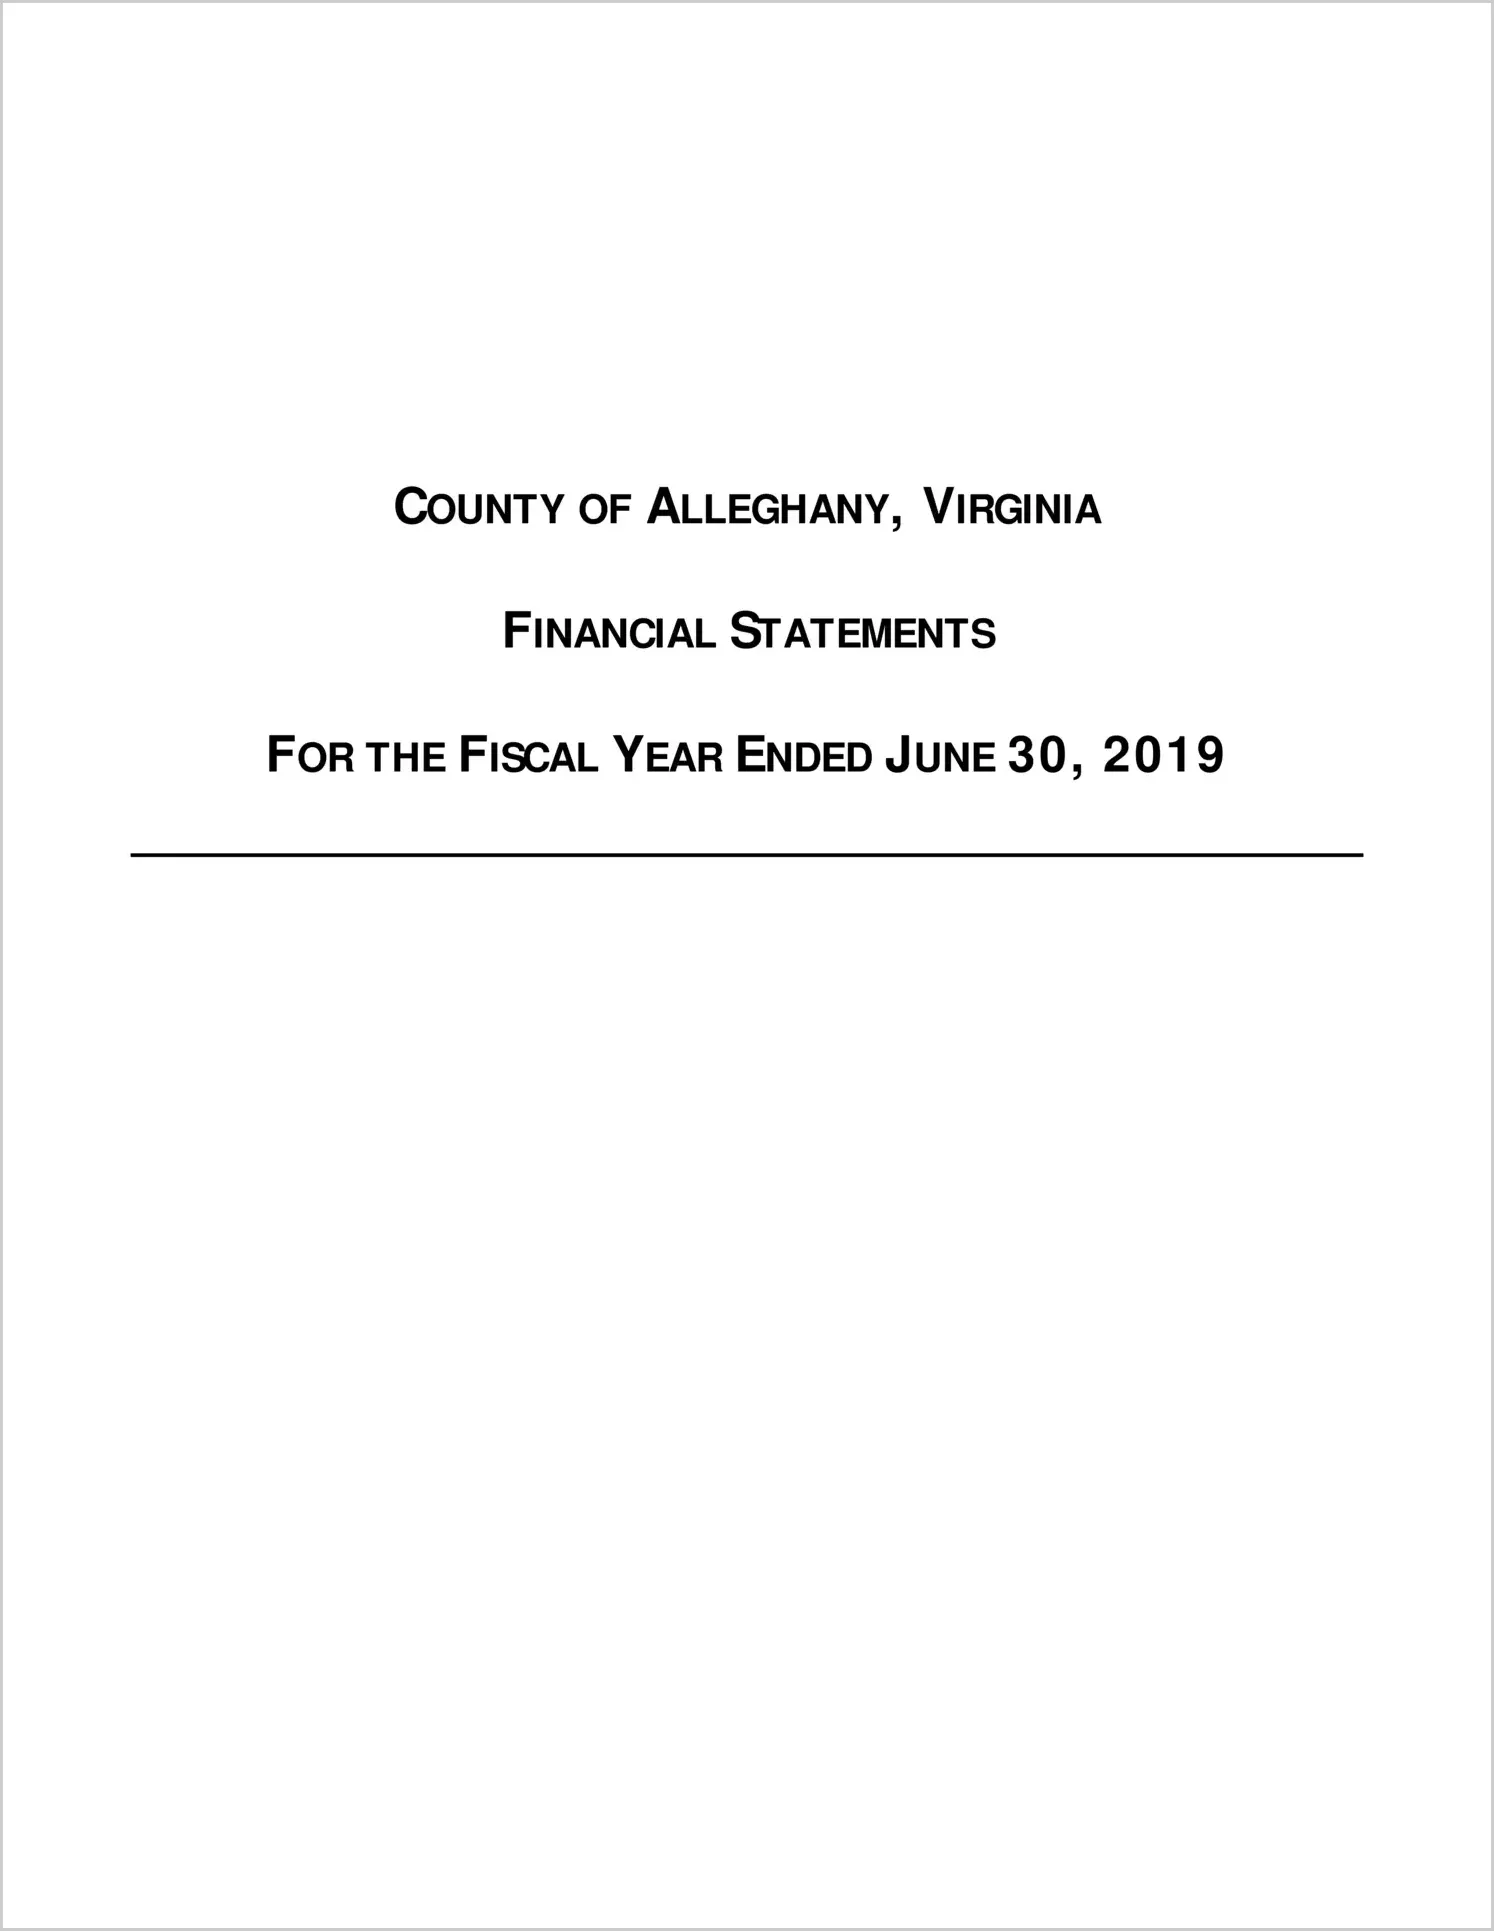 2019 Annual Financial Report for County of Alleghany